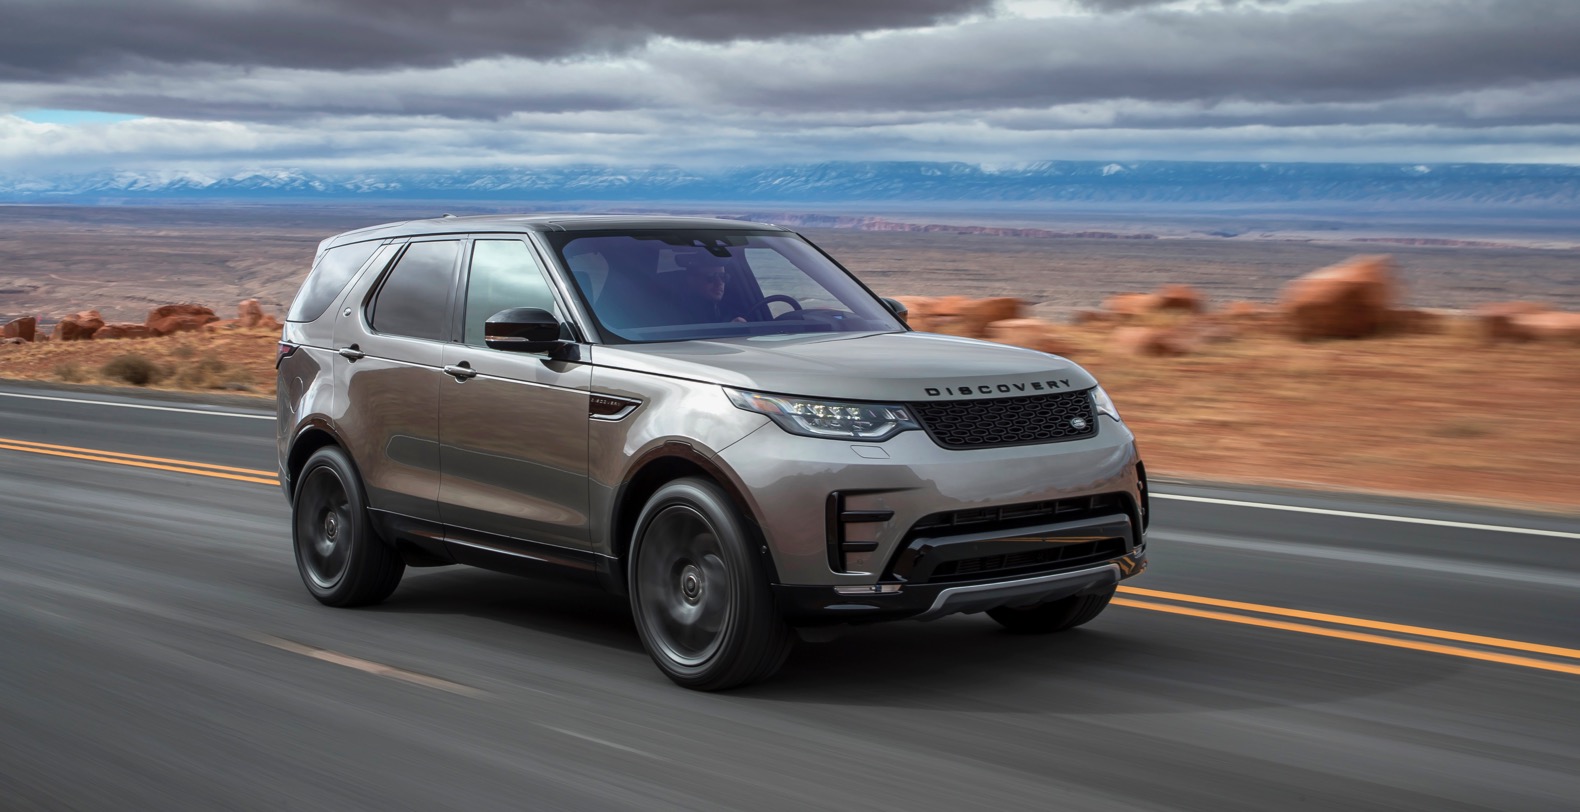 2019-Land-Rover-Discovery-0001.jpg